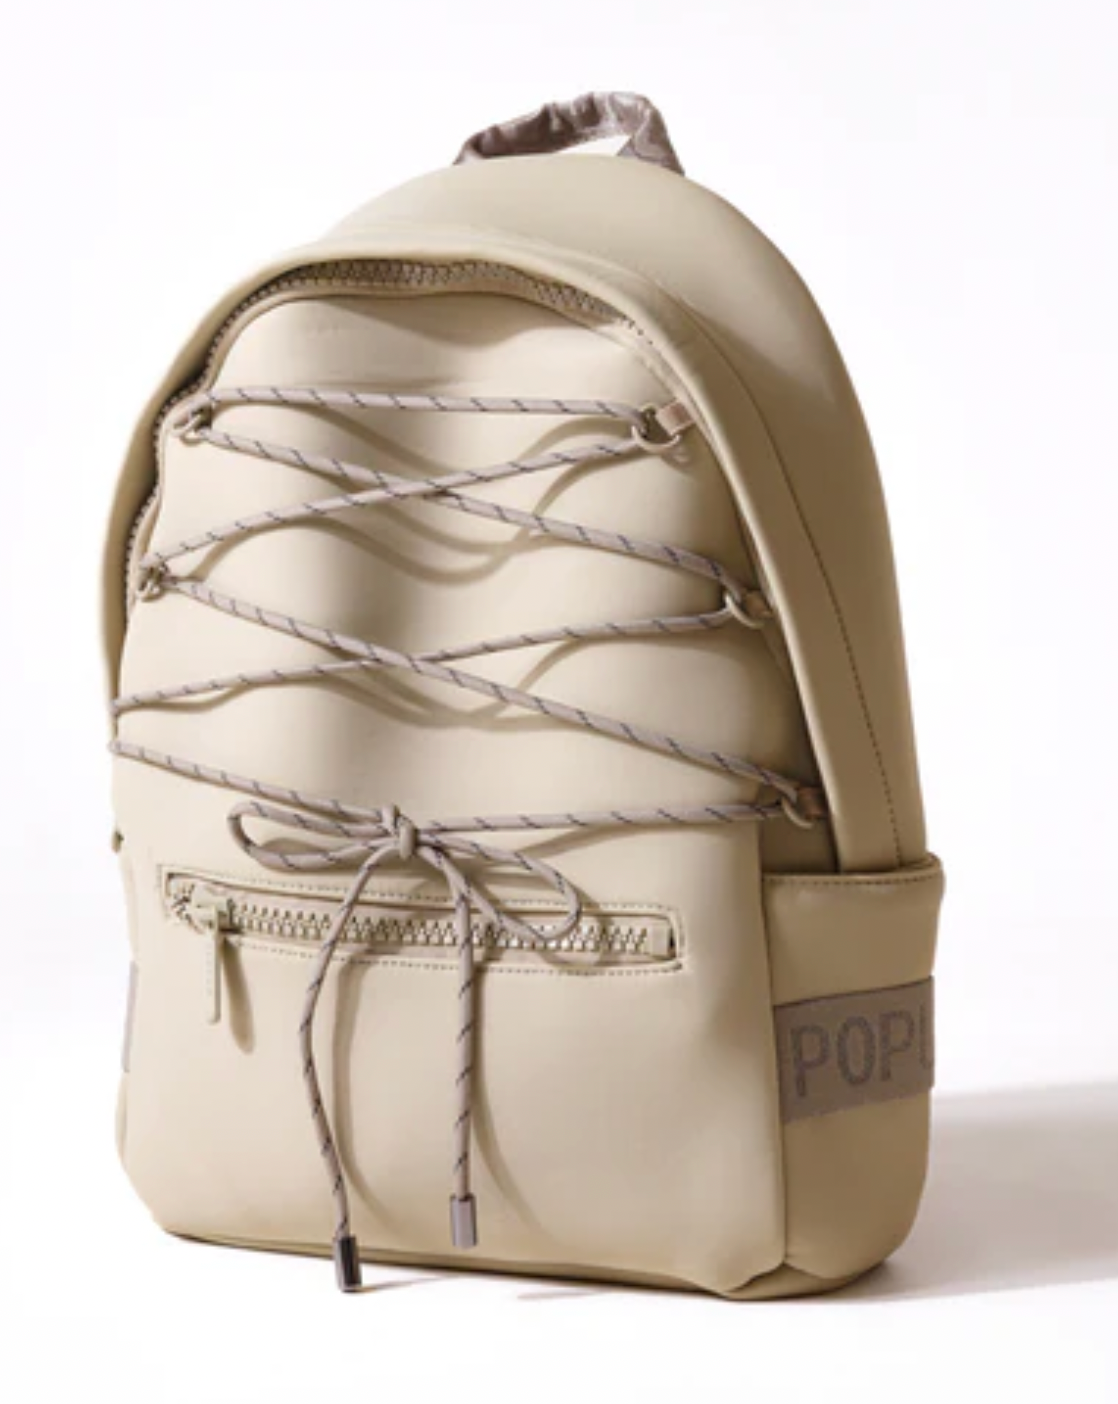 Image of Pop Ups Everyday Backpack in tan on a white background 